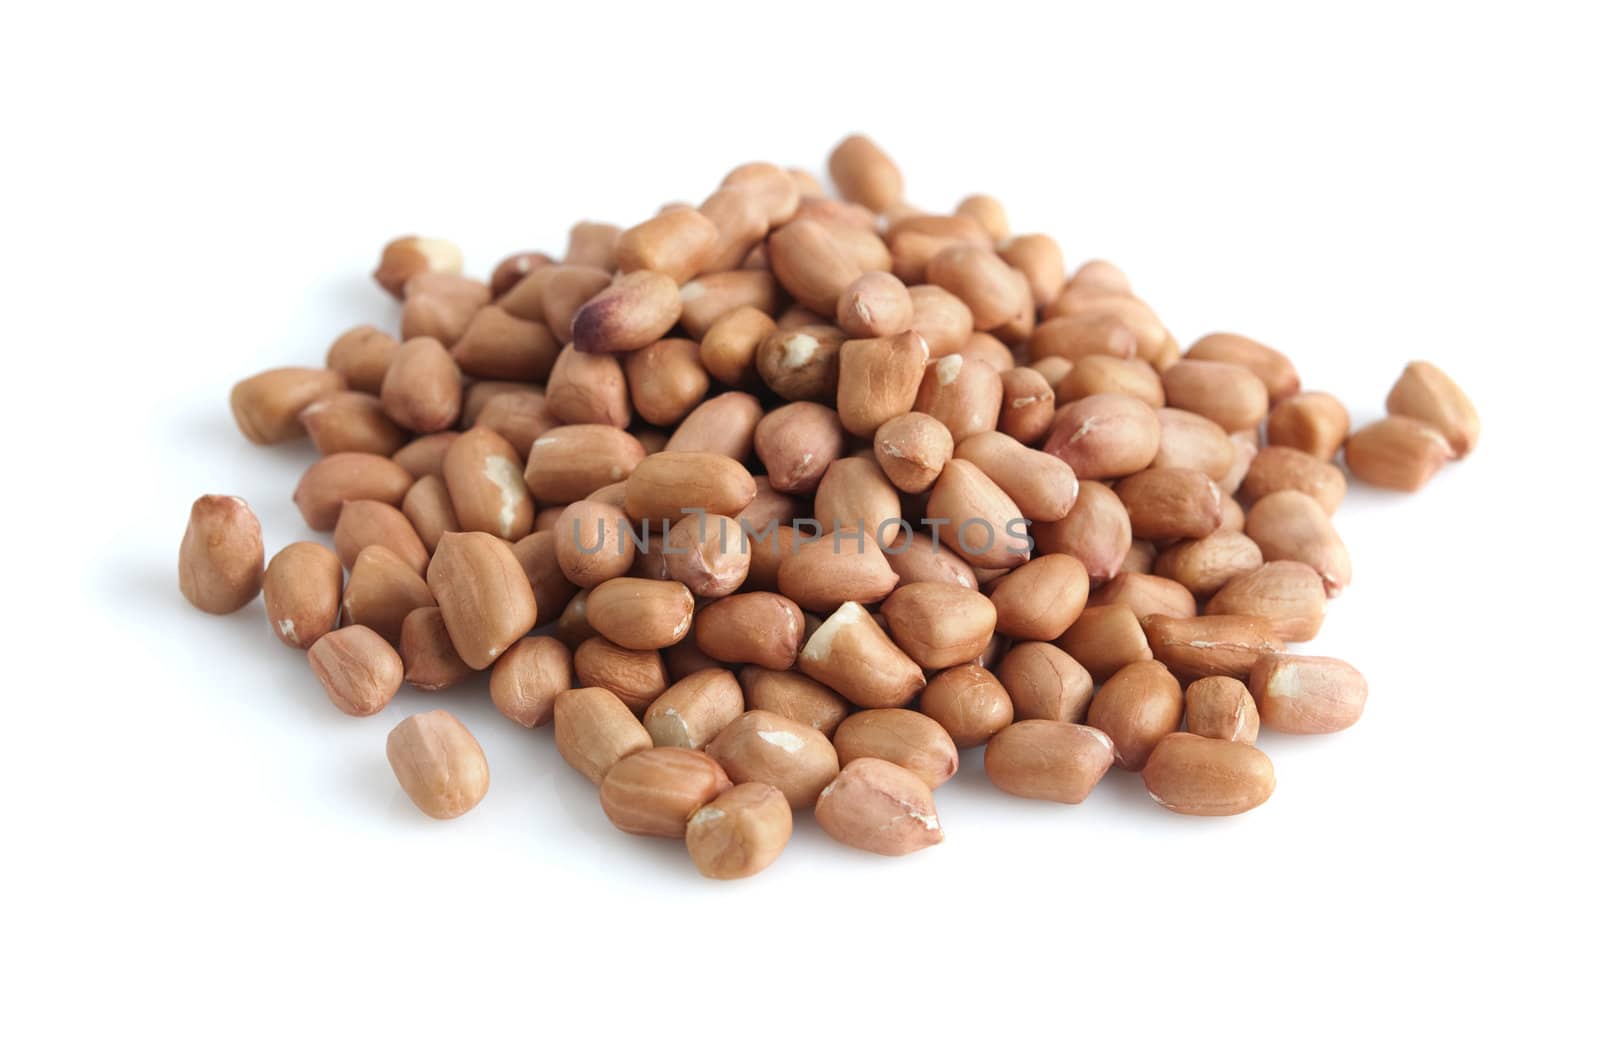 Pile of peanuts with skin isolated on white.